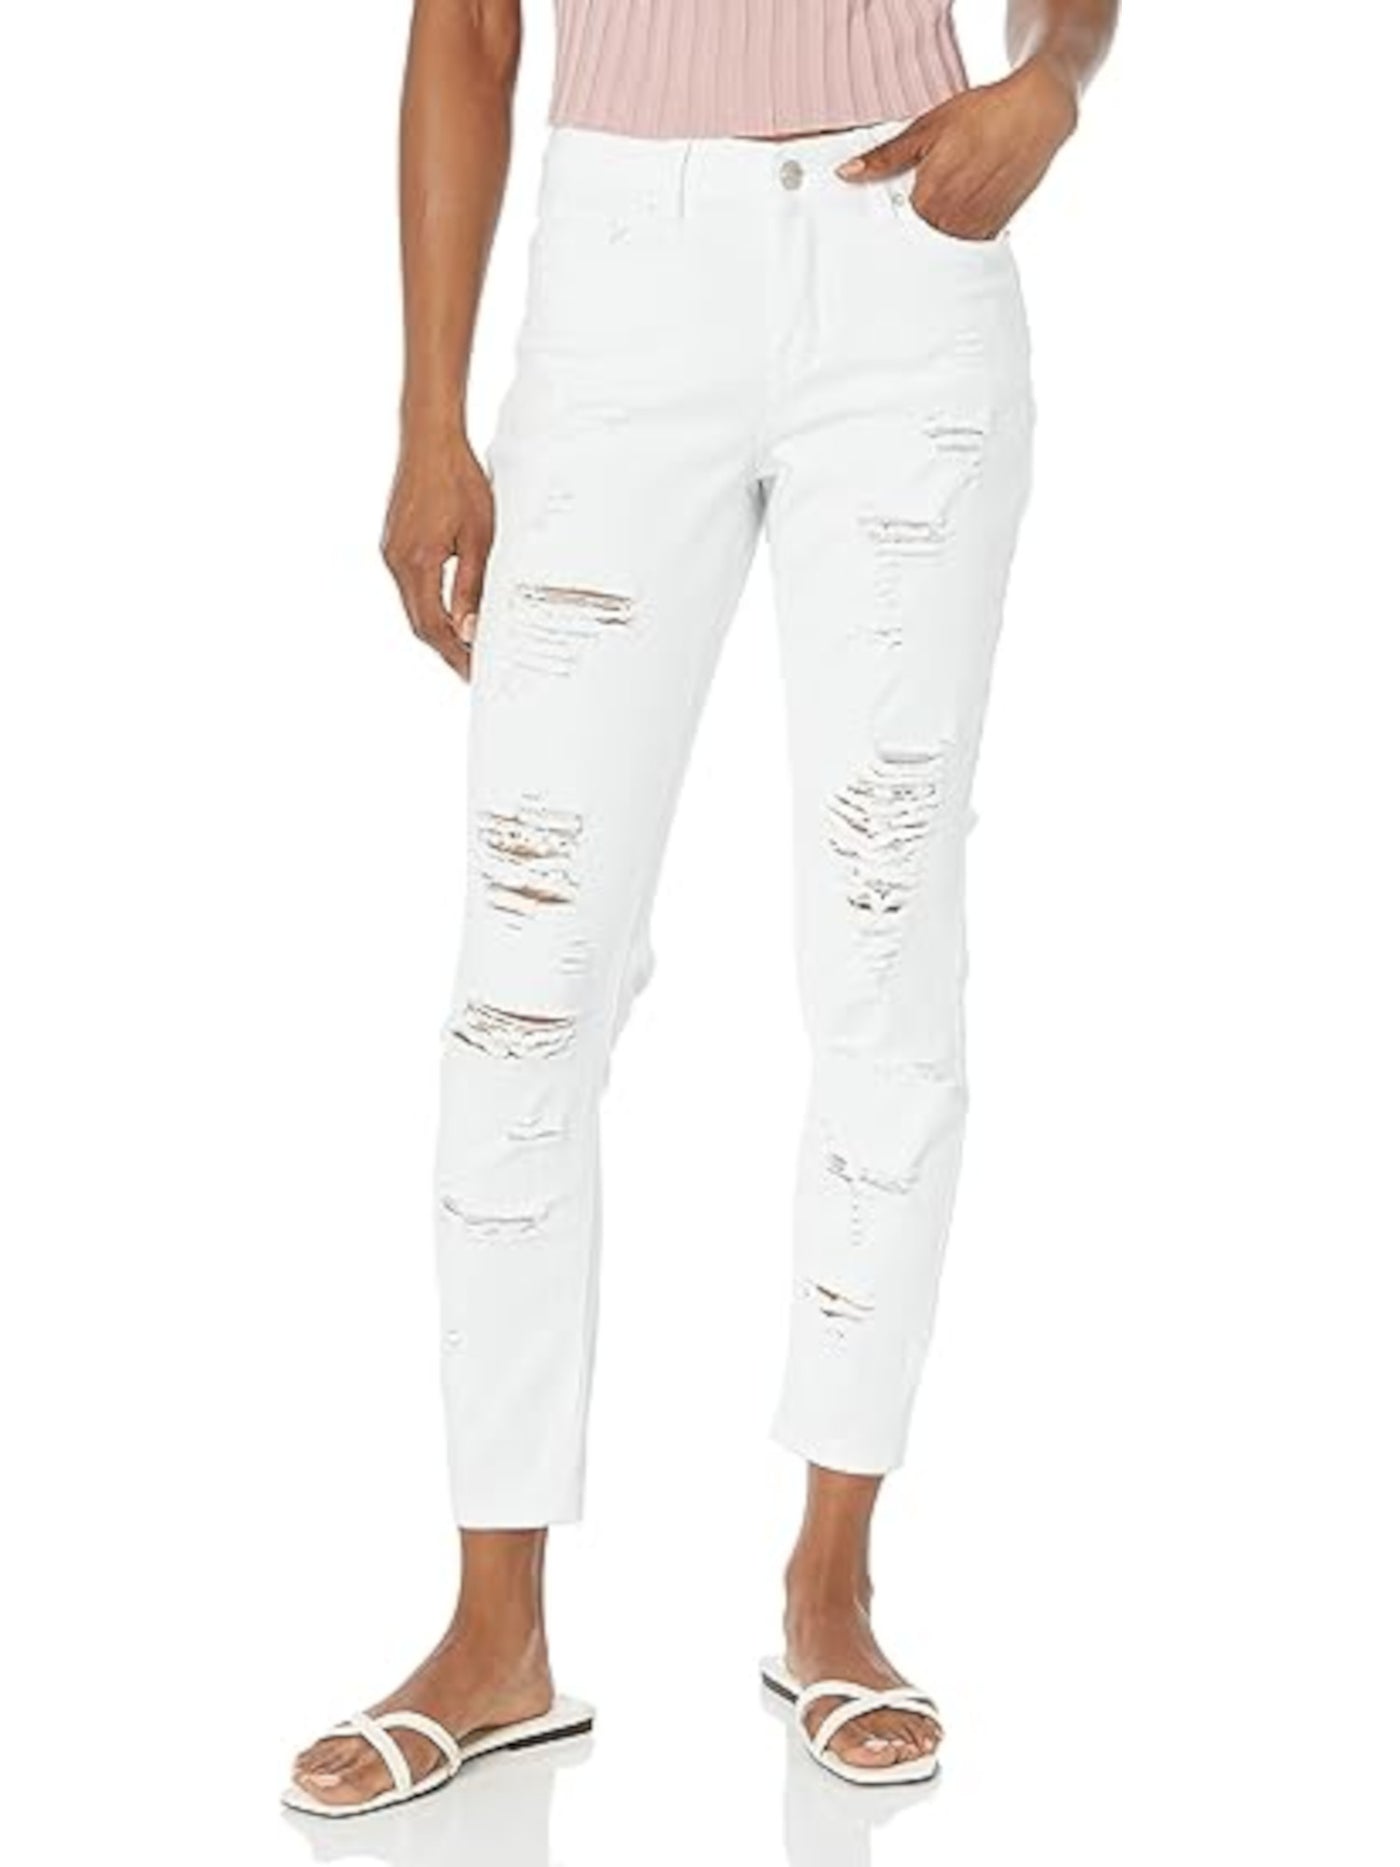 DOLLHOUSE Womens White Zippered Distressed Button Closure Hi-rise Skinny Jeans Juniors 3\4